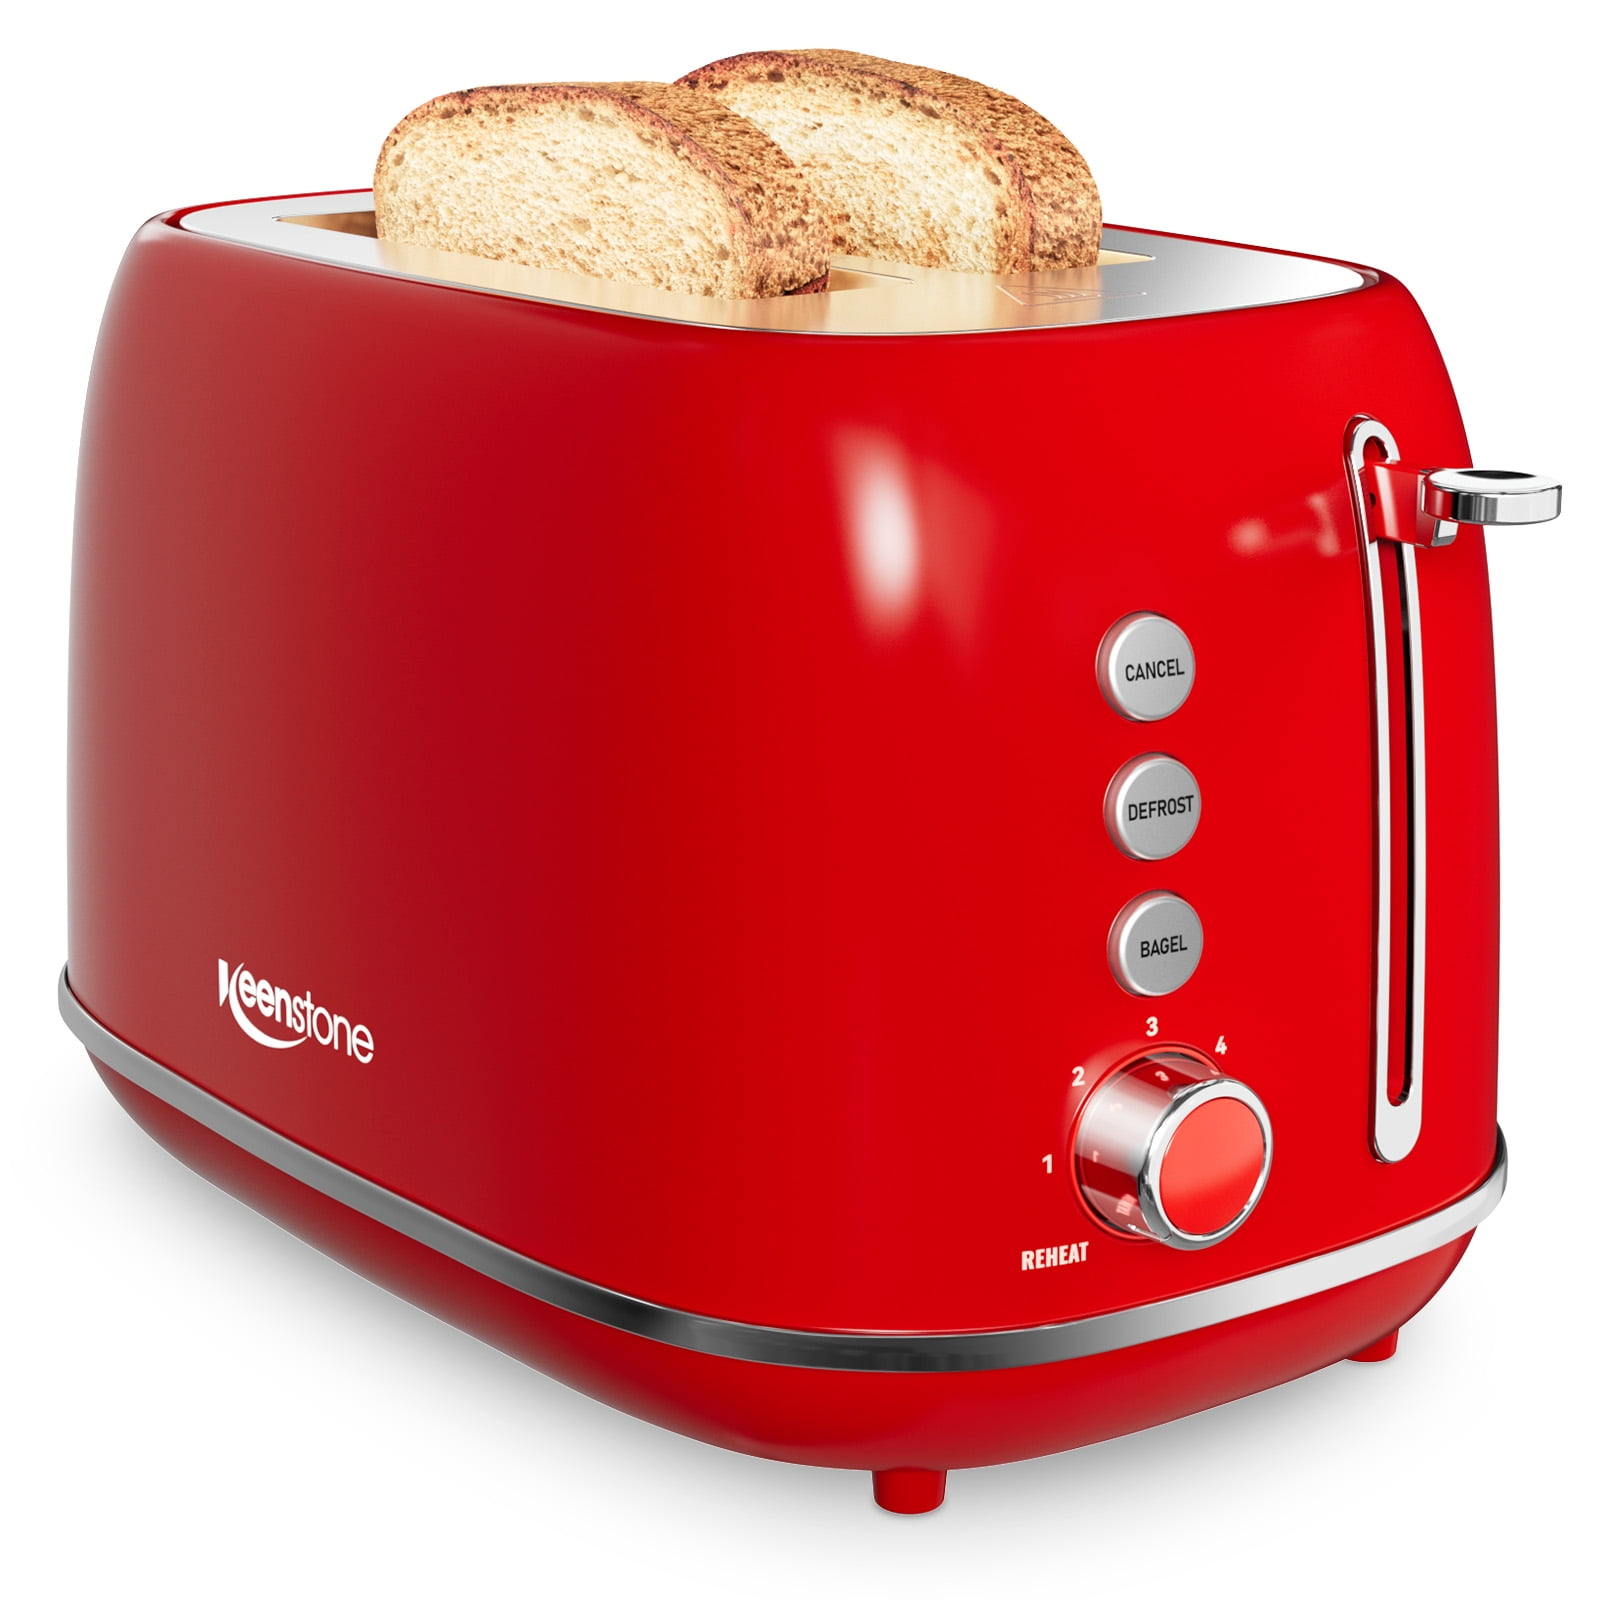  Toaster 2 Slices, Stainless Steel JEWJIO Retro Toaster with  1.5 Extra Wide Slot for 6 Bread Shades Setting/Bagel/Defrost/Reheat/Cancel  Function/Removable Crumb Tray 800W, Brushed Silver: Home & Kitchen